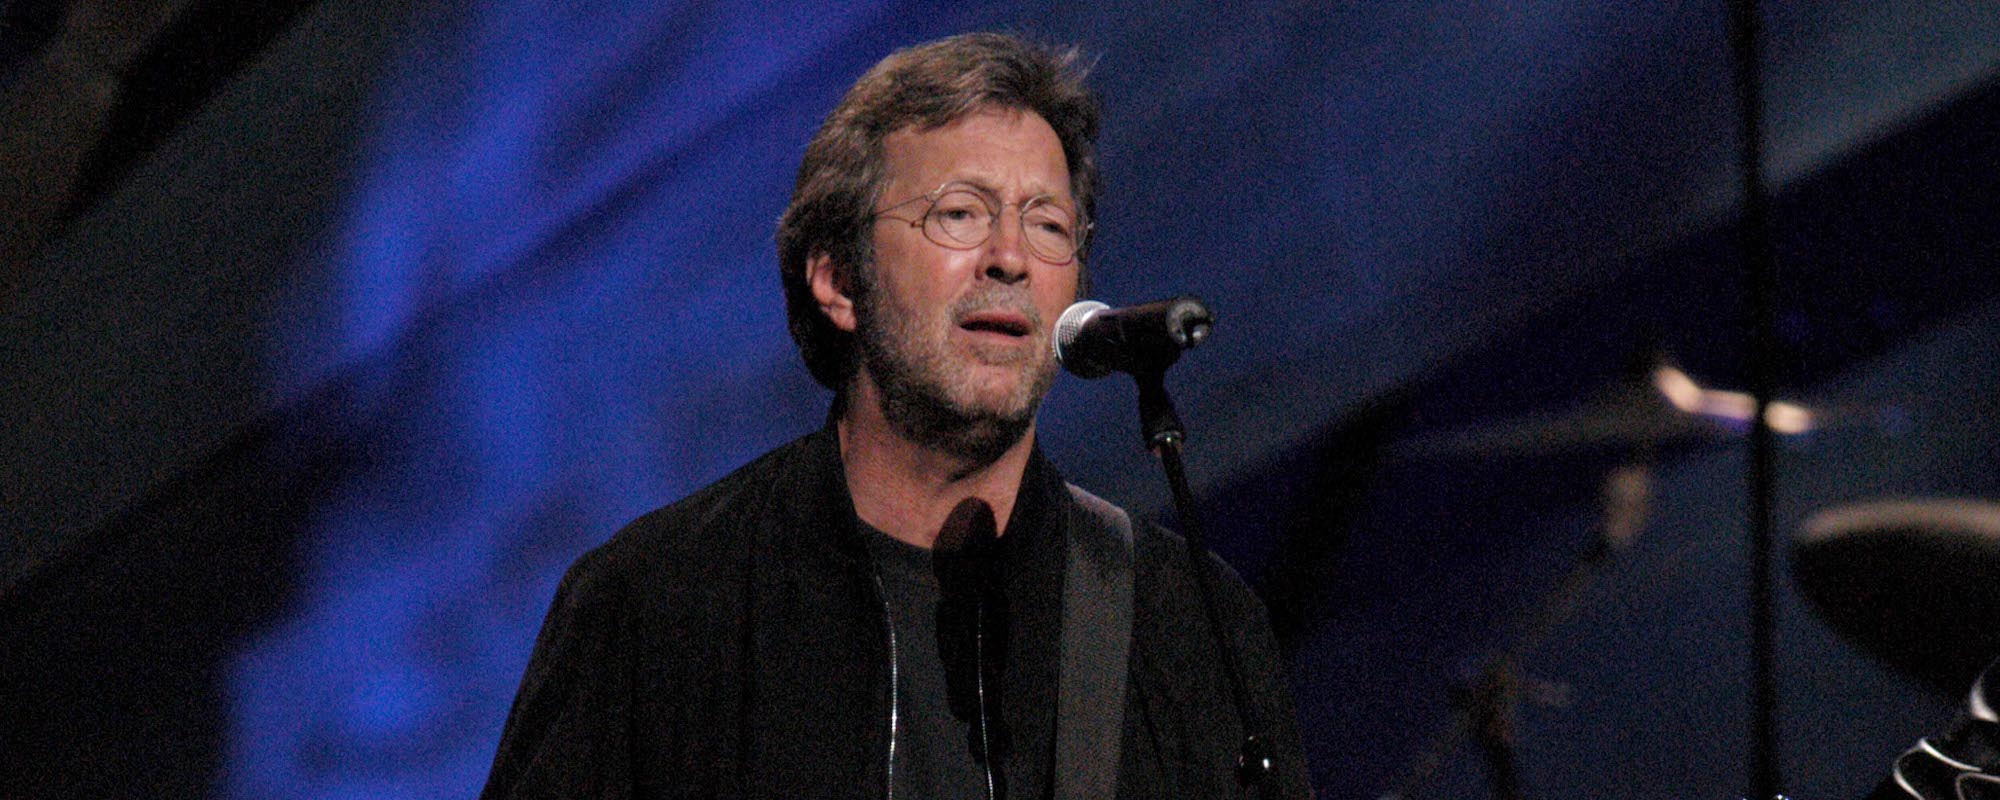 The Story Behind One of the Hardest Songs for Eric Clapton to Record, “My Father’s Eyes”